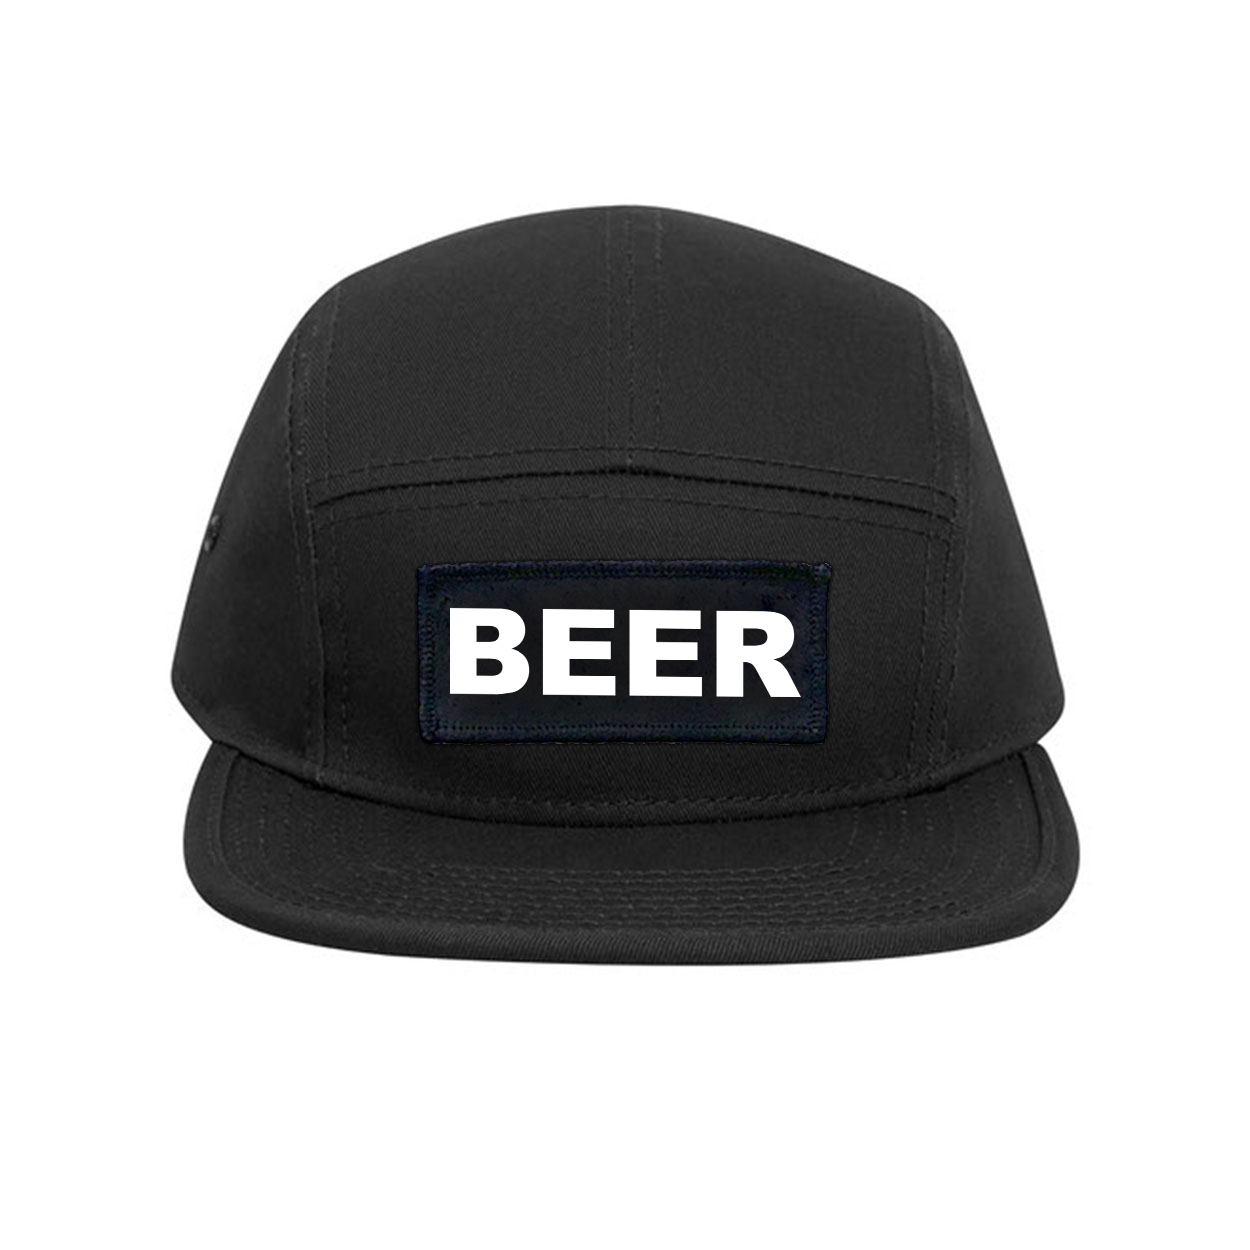 Beer Brand Logo Classic Woven Patch Classic Camper Hat Black